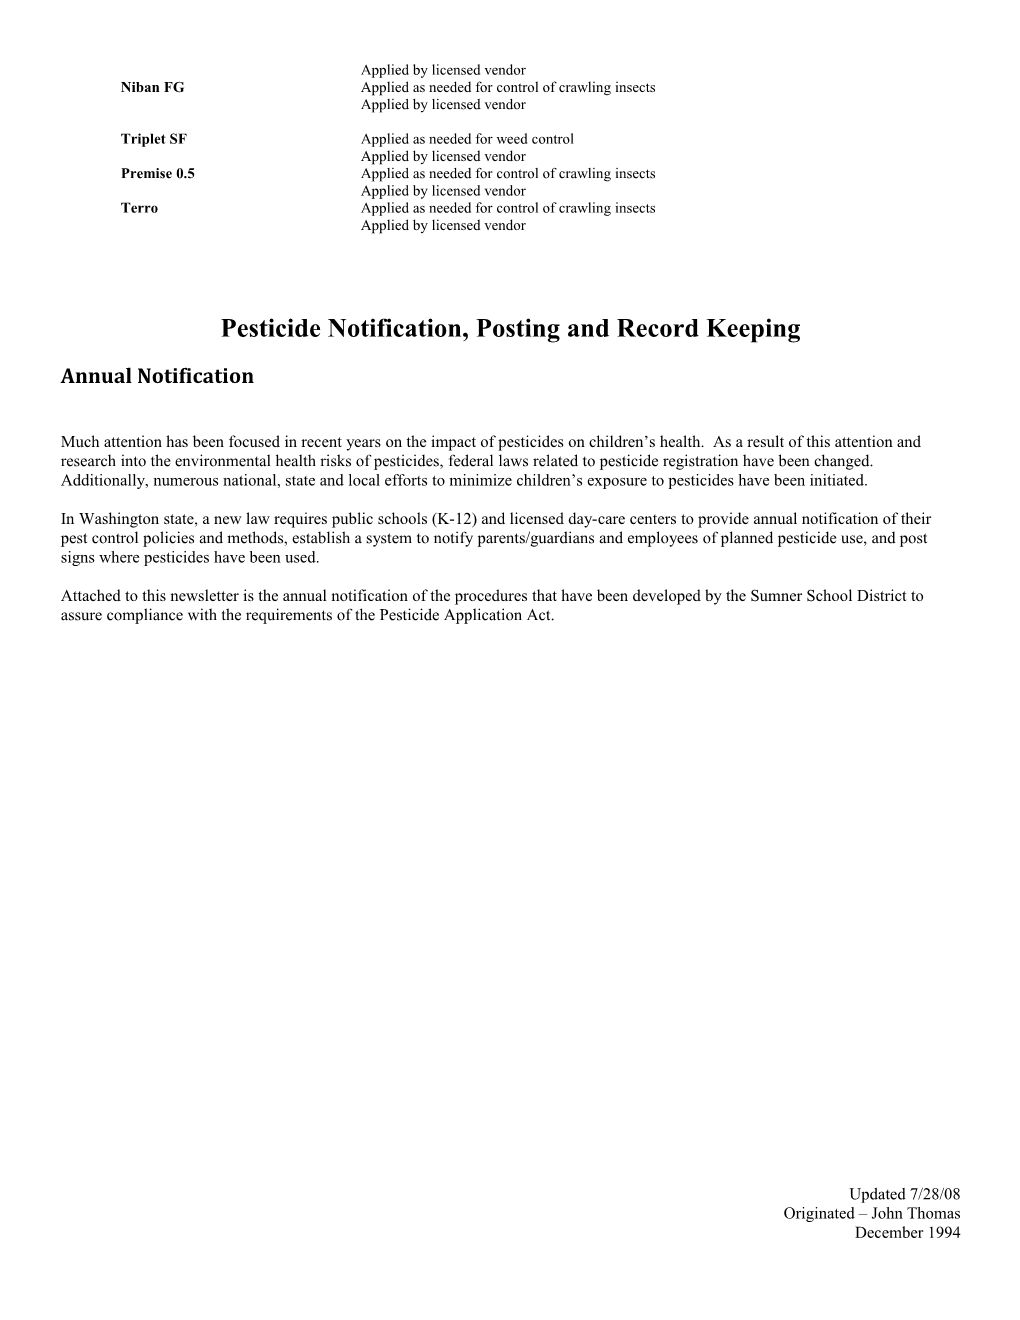 Annual Pesticide Notification, Posting and Record Keeping